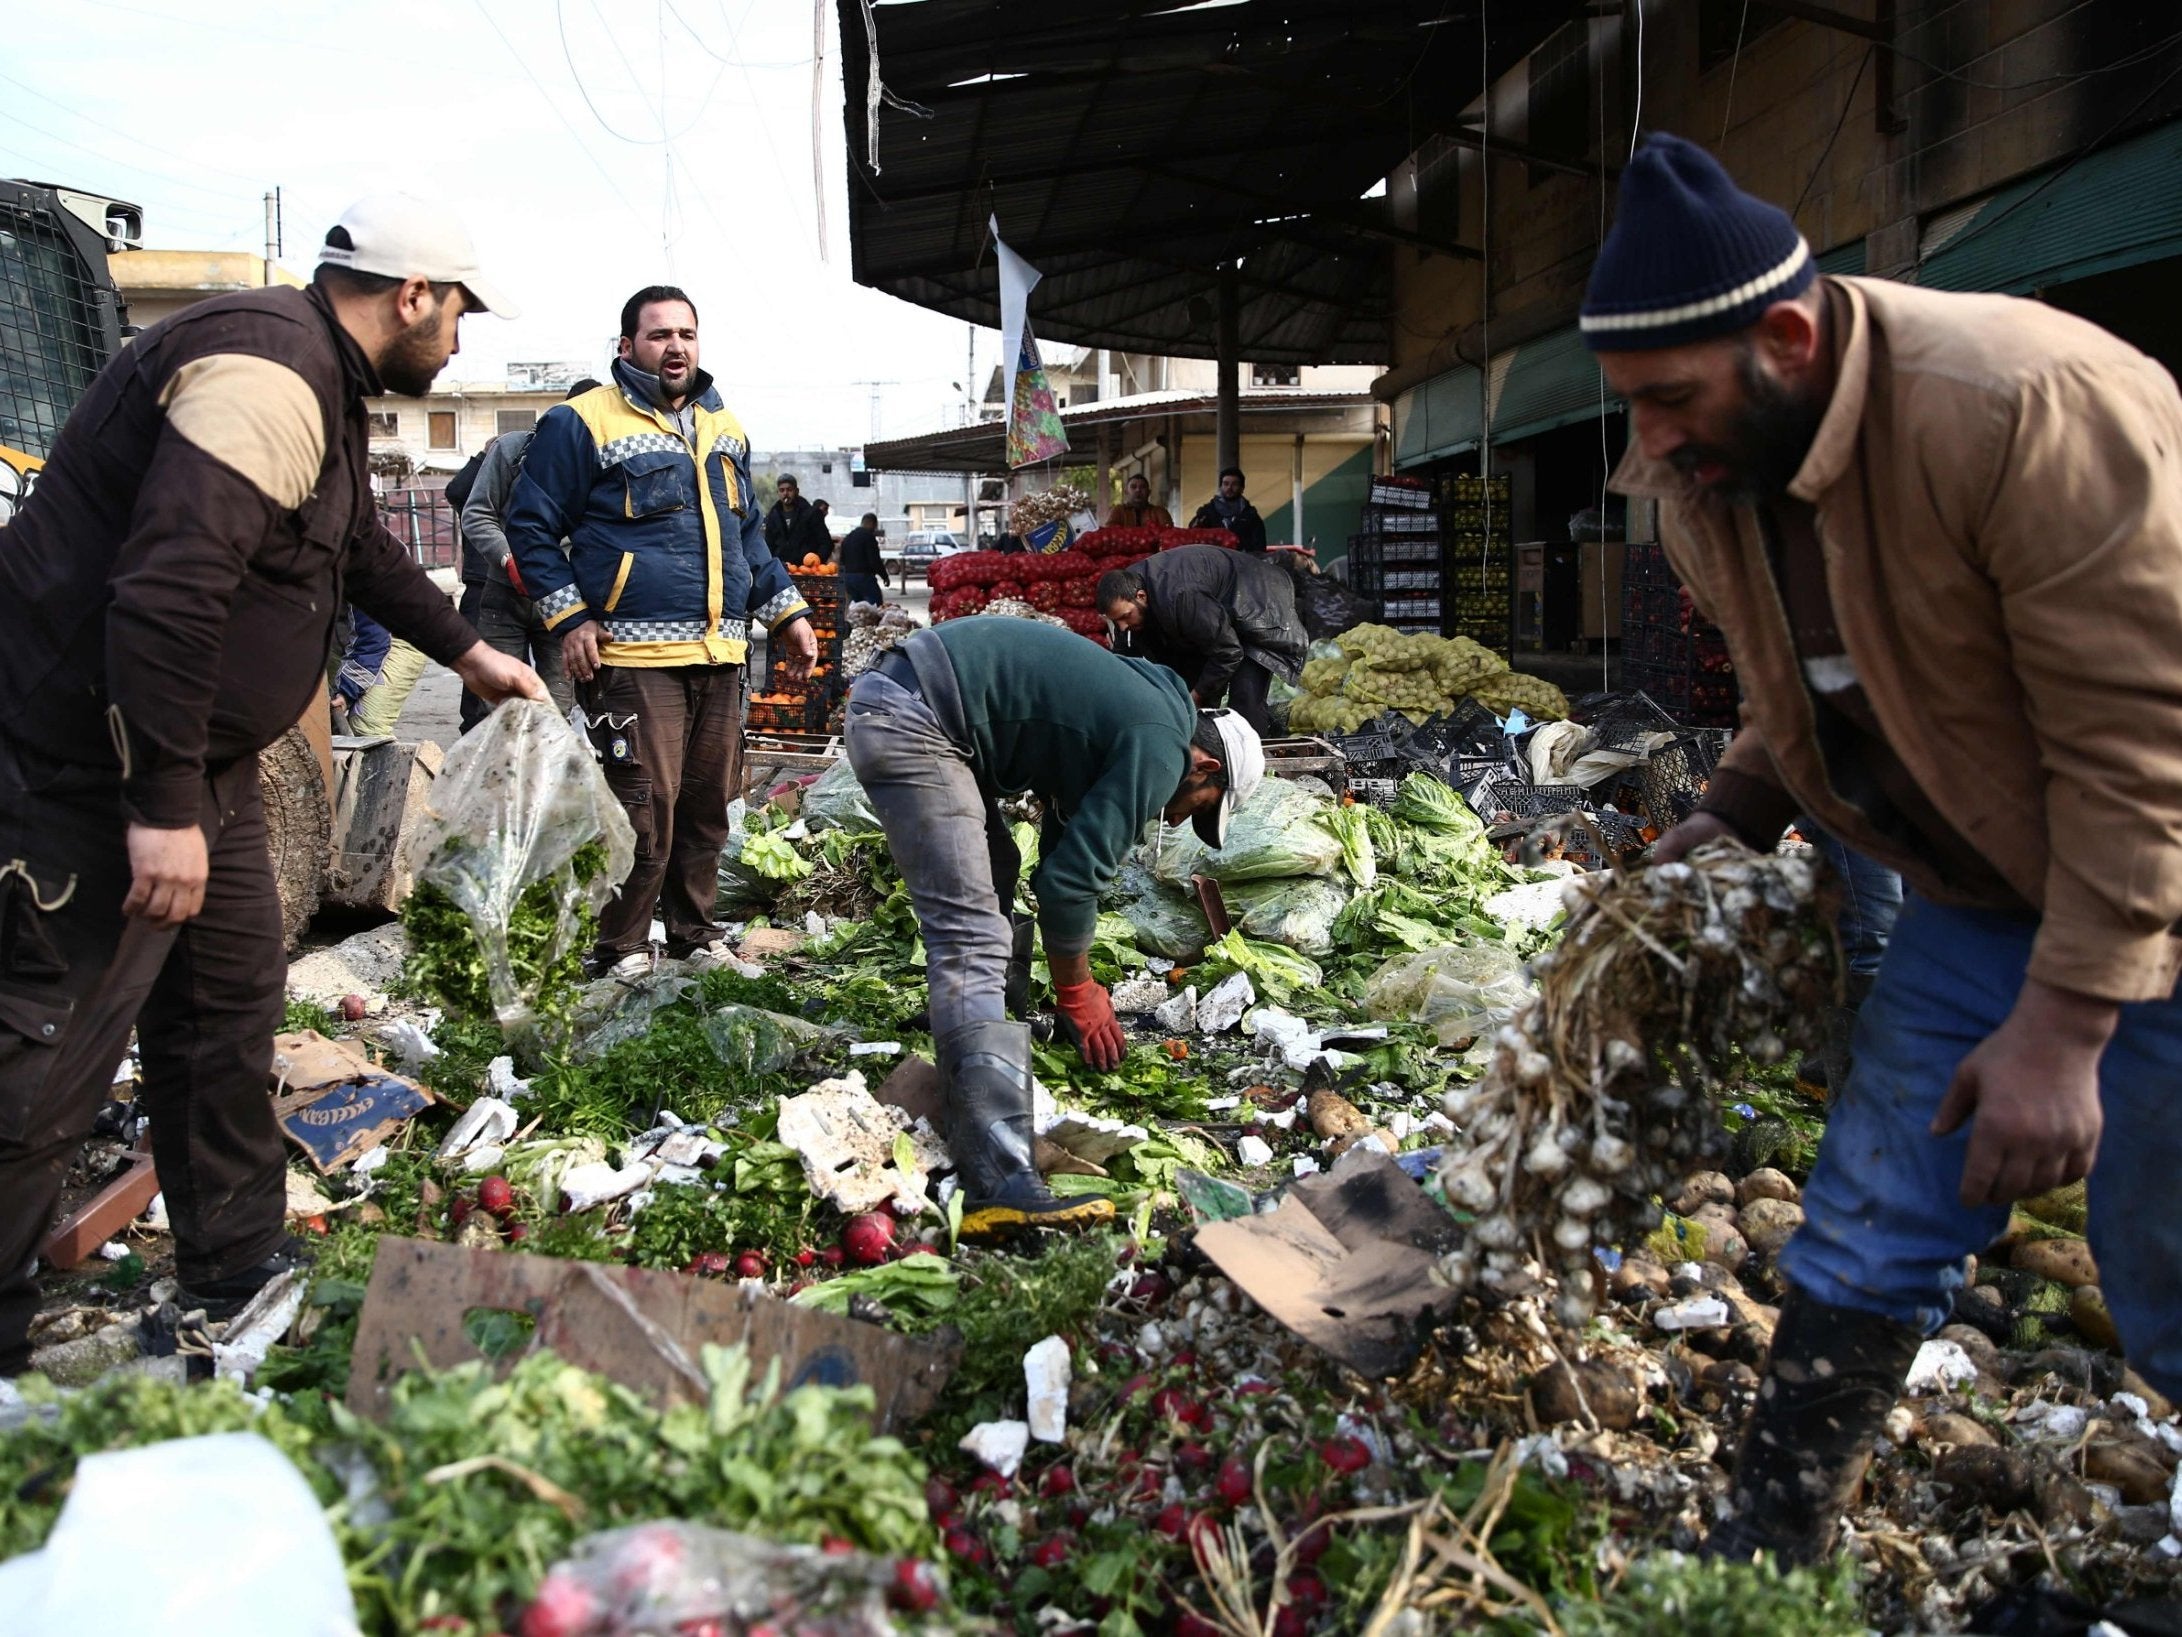 People try to salvage vegetables after a car bomb reportedly exploded near a position of pro-Turkey fighters in a market in the northern Syrian city of Afrin, on 16 December 2018 (Nazeer Al-Khatib /